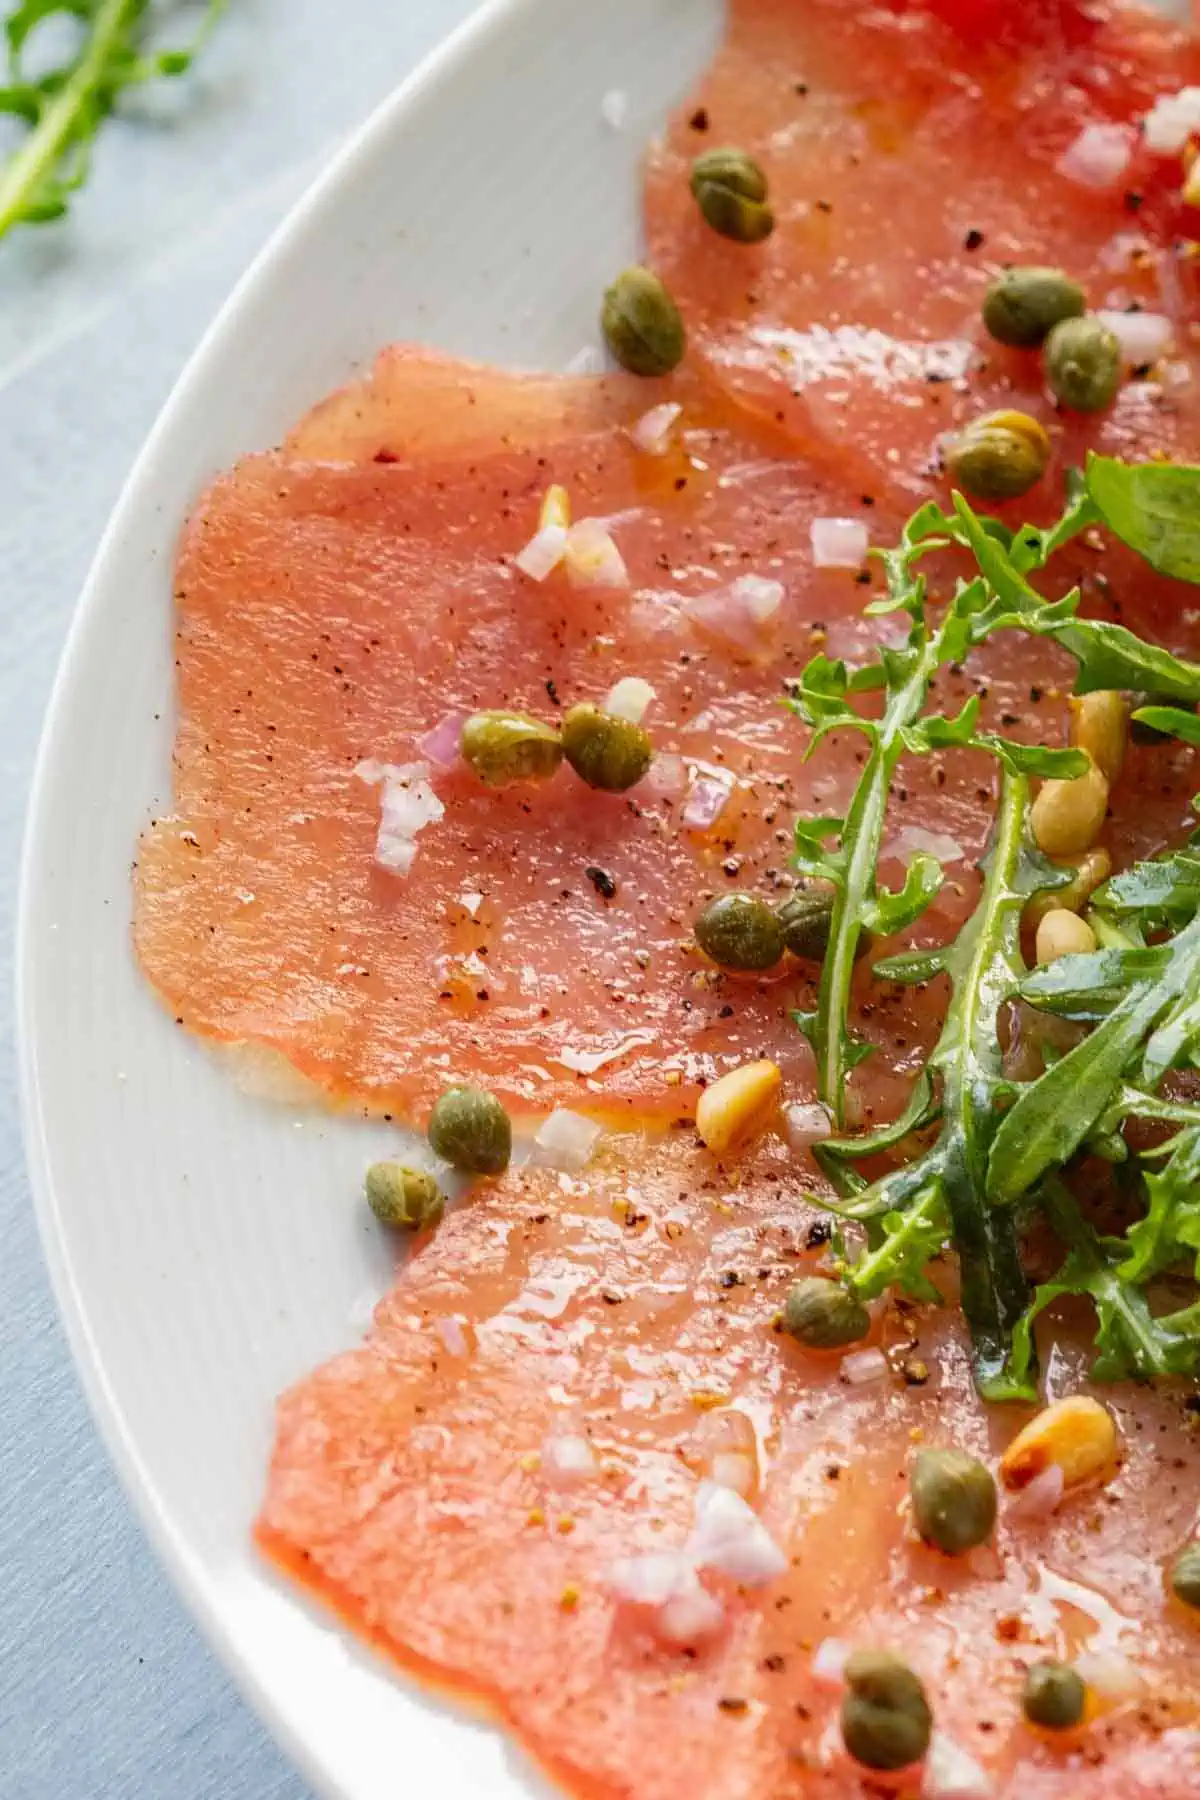 Top view close up of a plate of classic tuna carpaccio with arugula, capers and pine nuts.